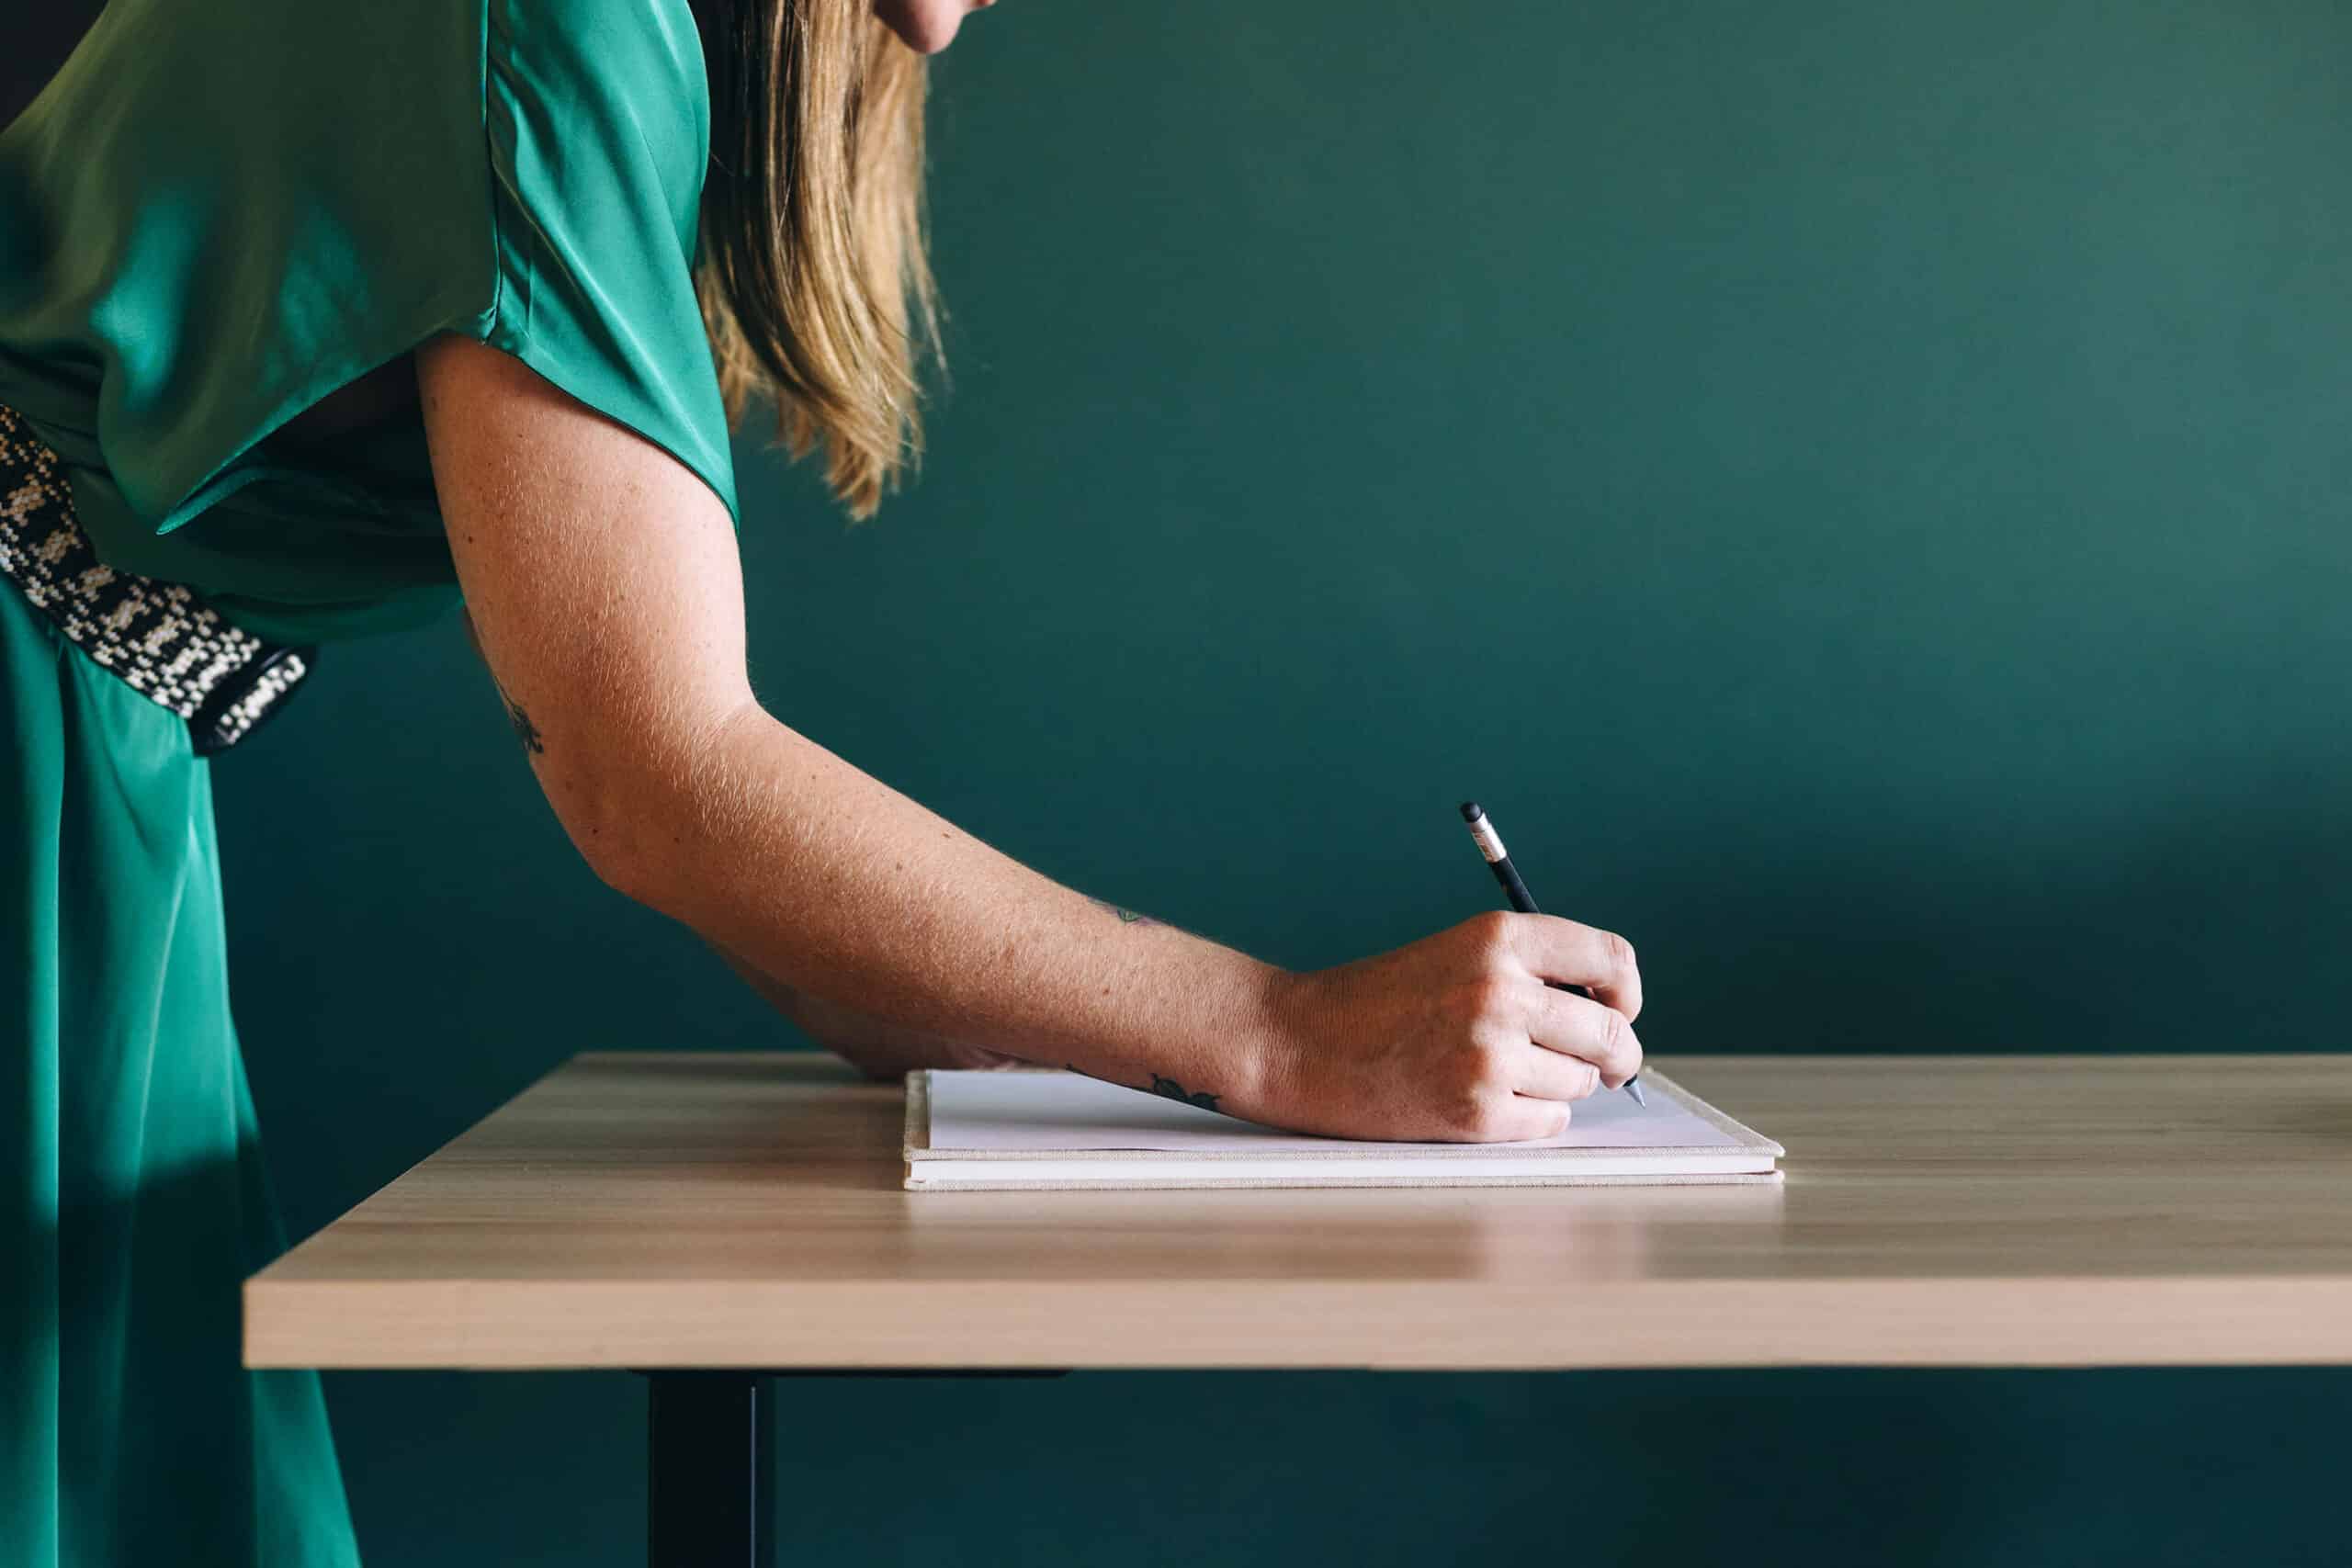 A person in a teal dress is writing in a notebook on a wooden desk against a green background. Only the person's right arm and part of their upper body are visible in the frame.